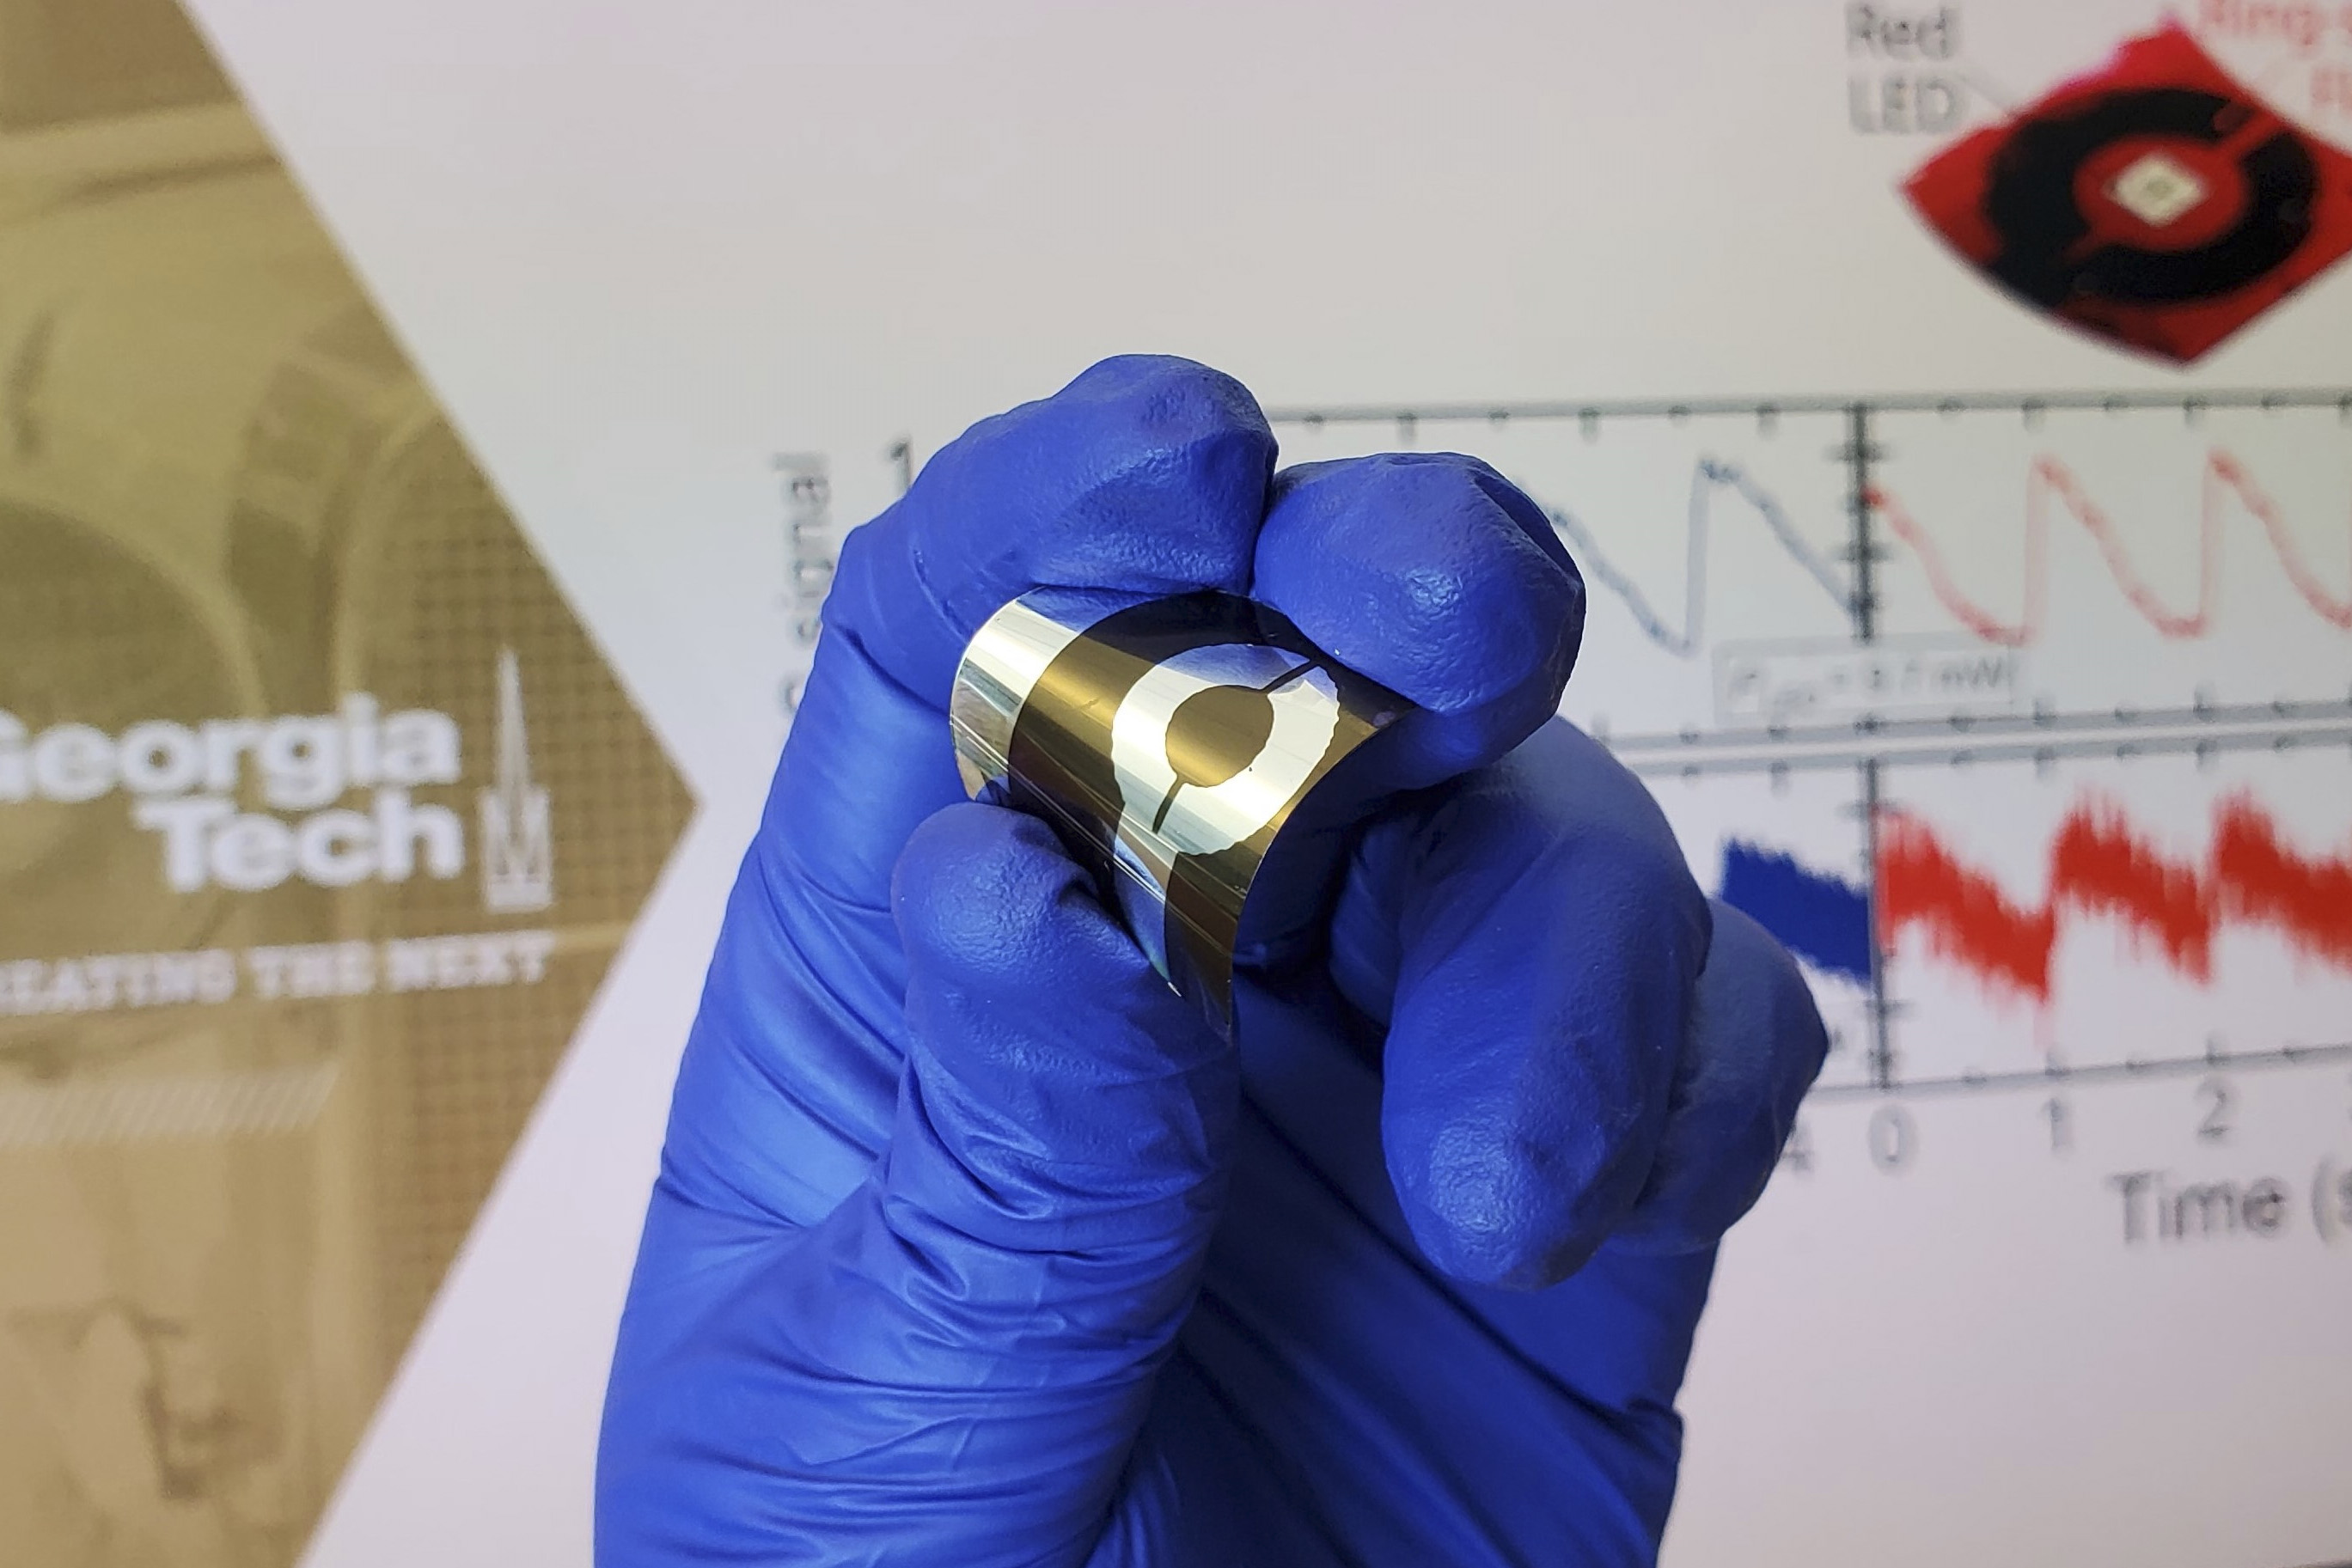 Flexible ring-shaped, large-area organic photodiodes can improve performance of wearable sensors that monitor cardiac and pulmonary health. (Credit: Canek Fuentes-Hernandez, Georgia Tech)